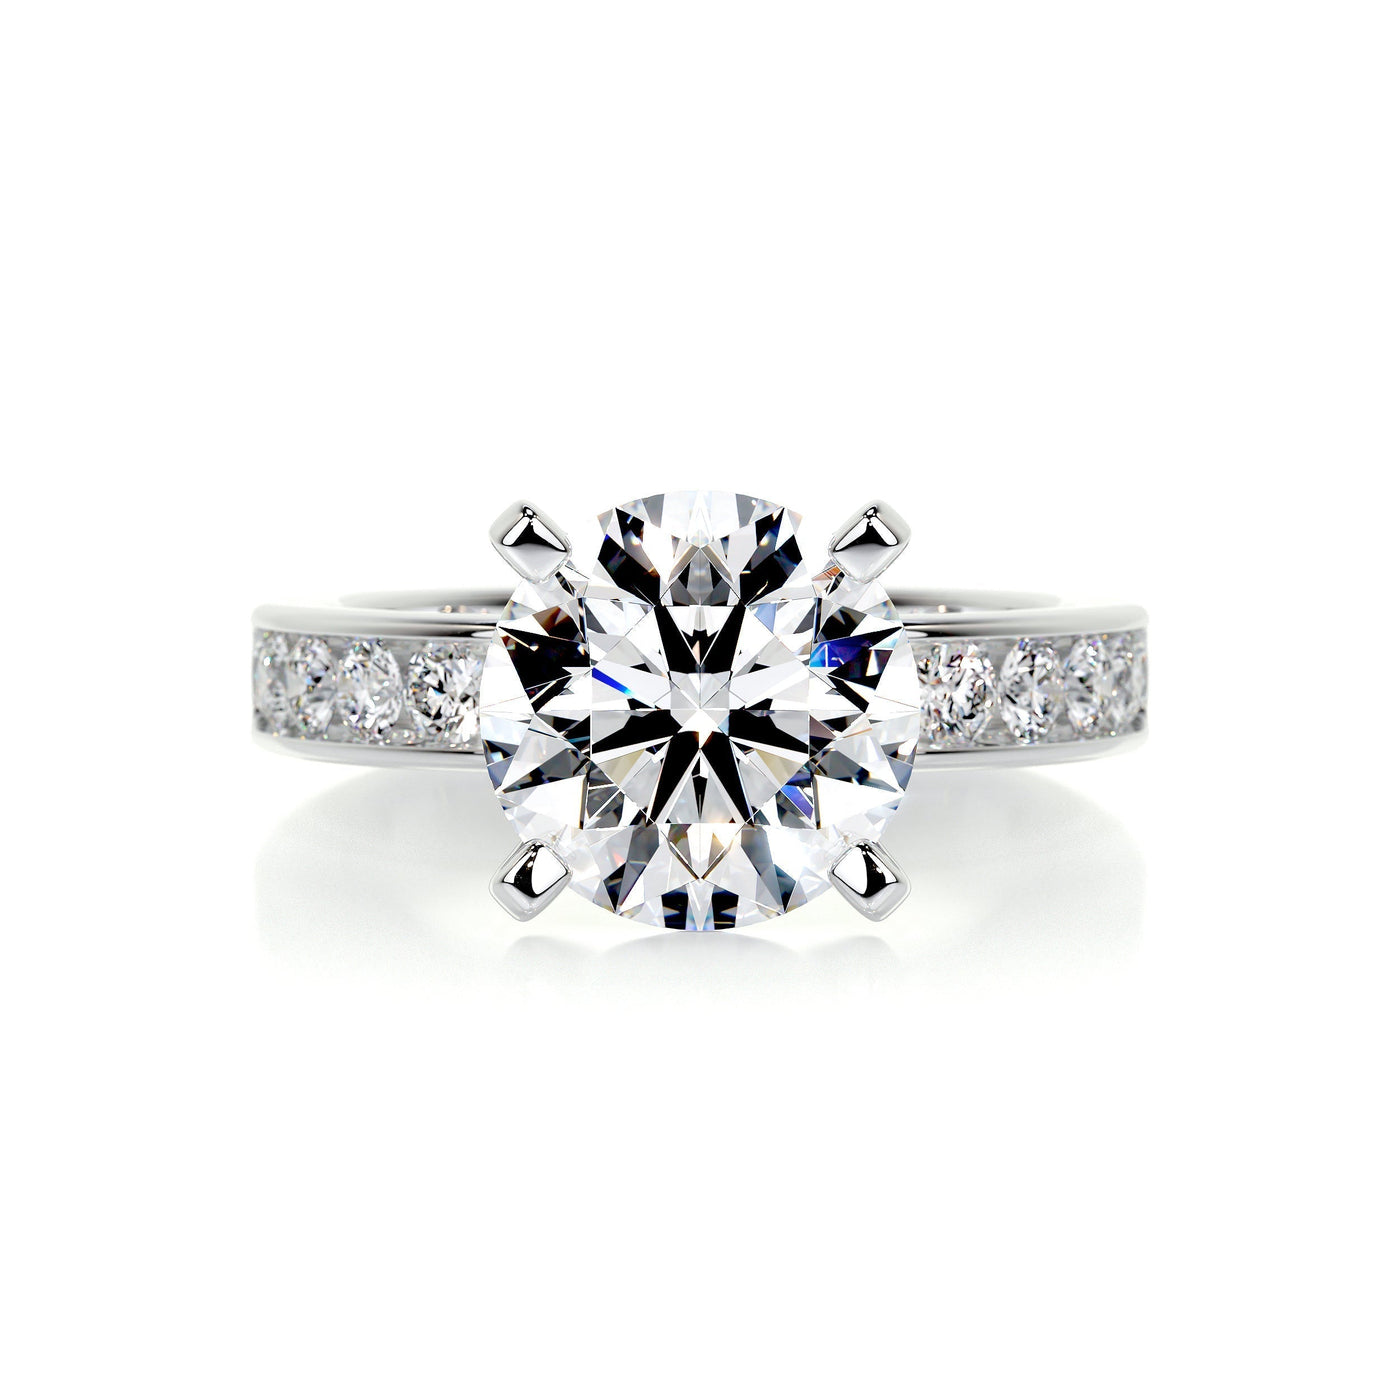 3.0 Carat Round Cut Channel Setting Moissanite Engagement Ring